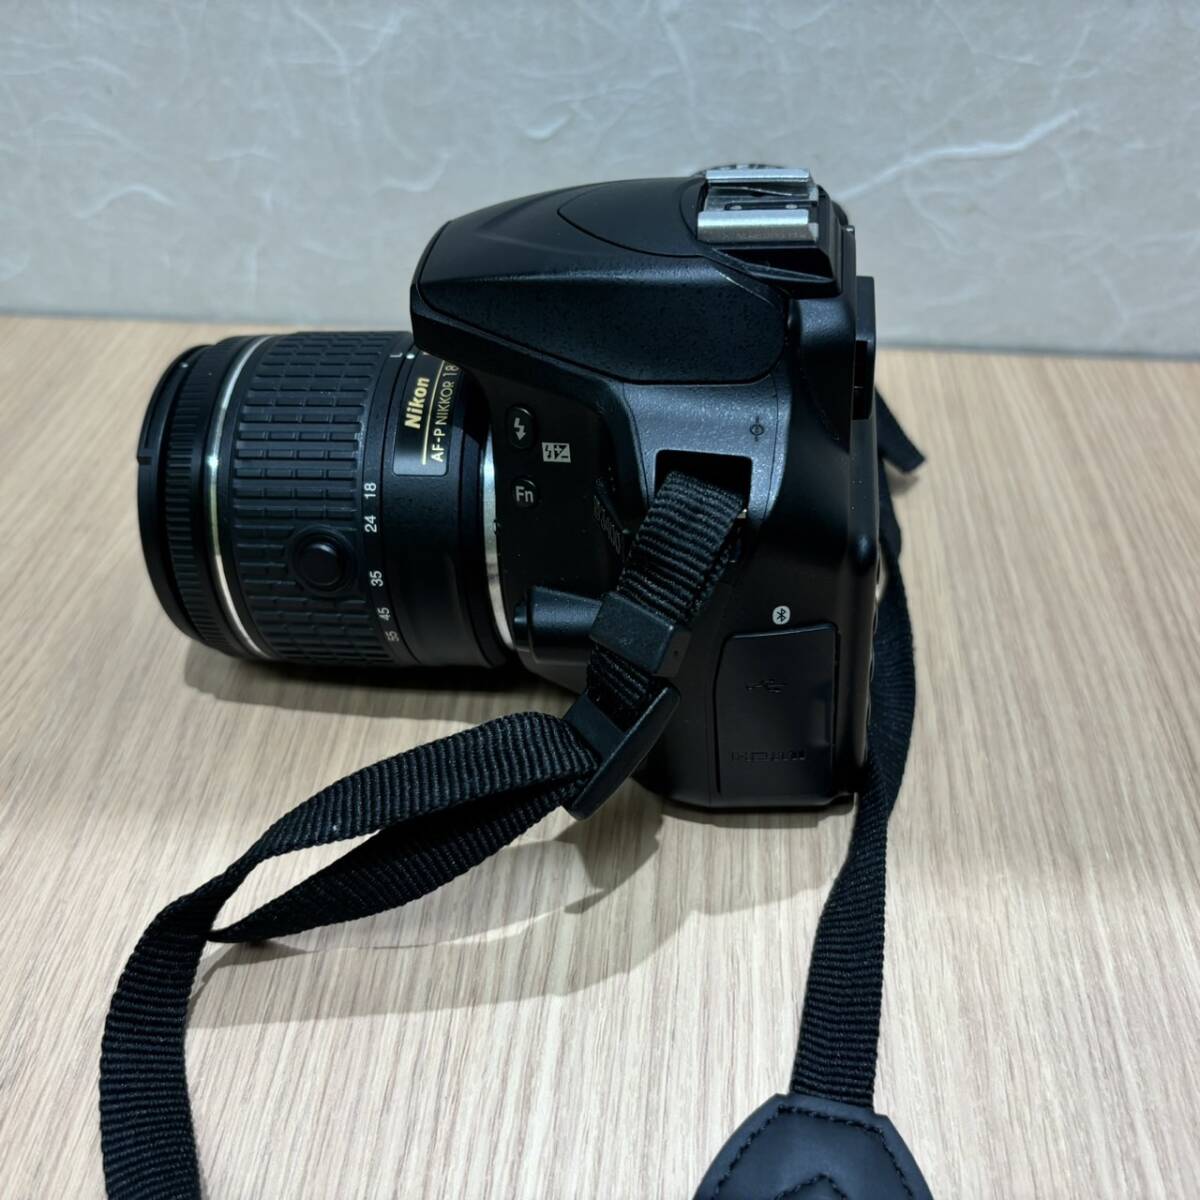 [N-19690]1 jpy start NIKON D3400 NIKKOR 18-55mm photographing camera accessory less present condition goods only Nikon single‐lens reflex electrification verification settled 